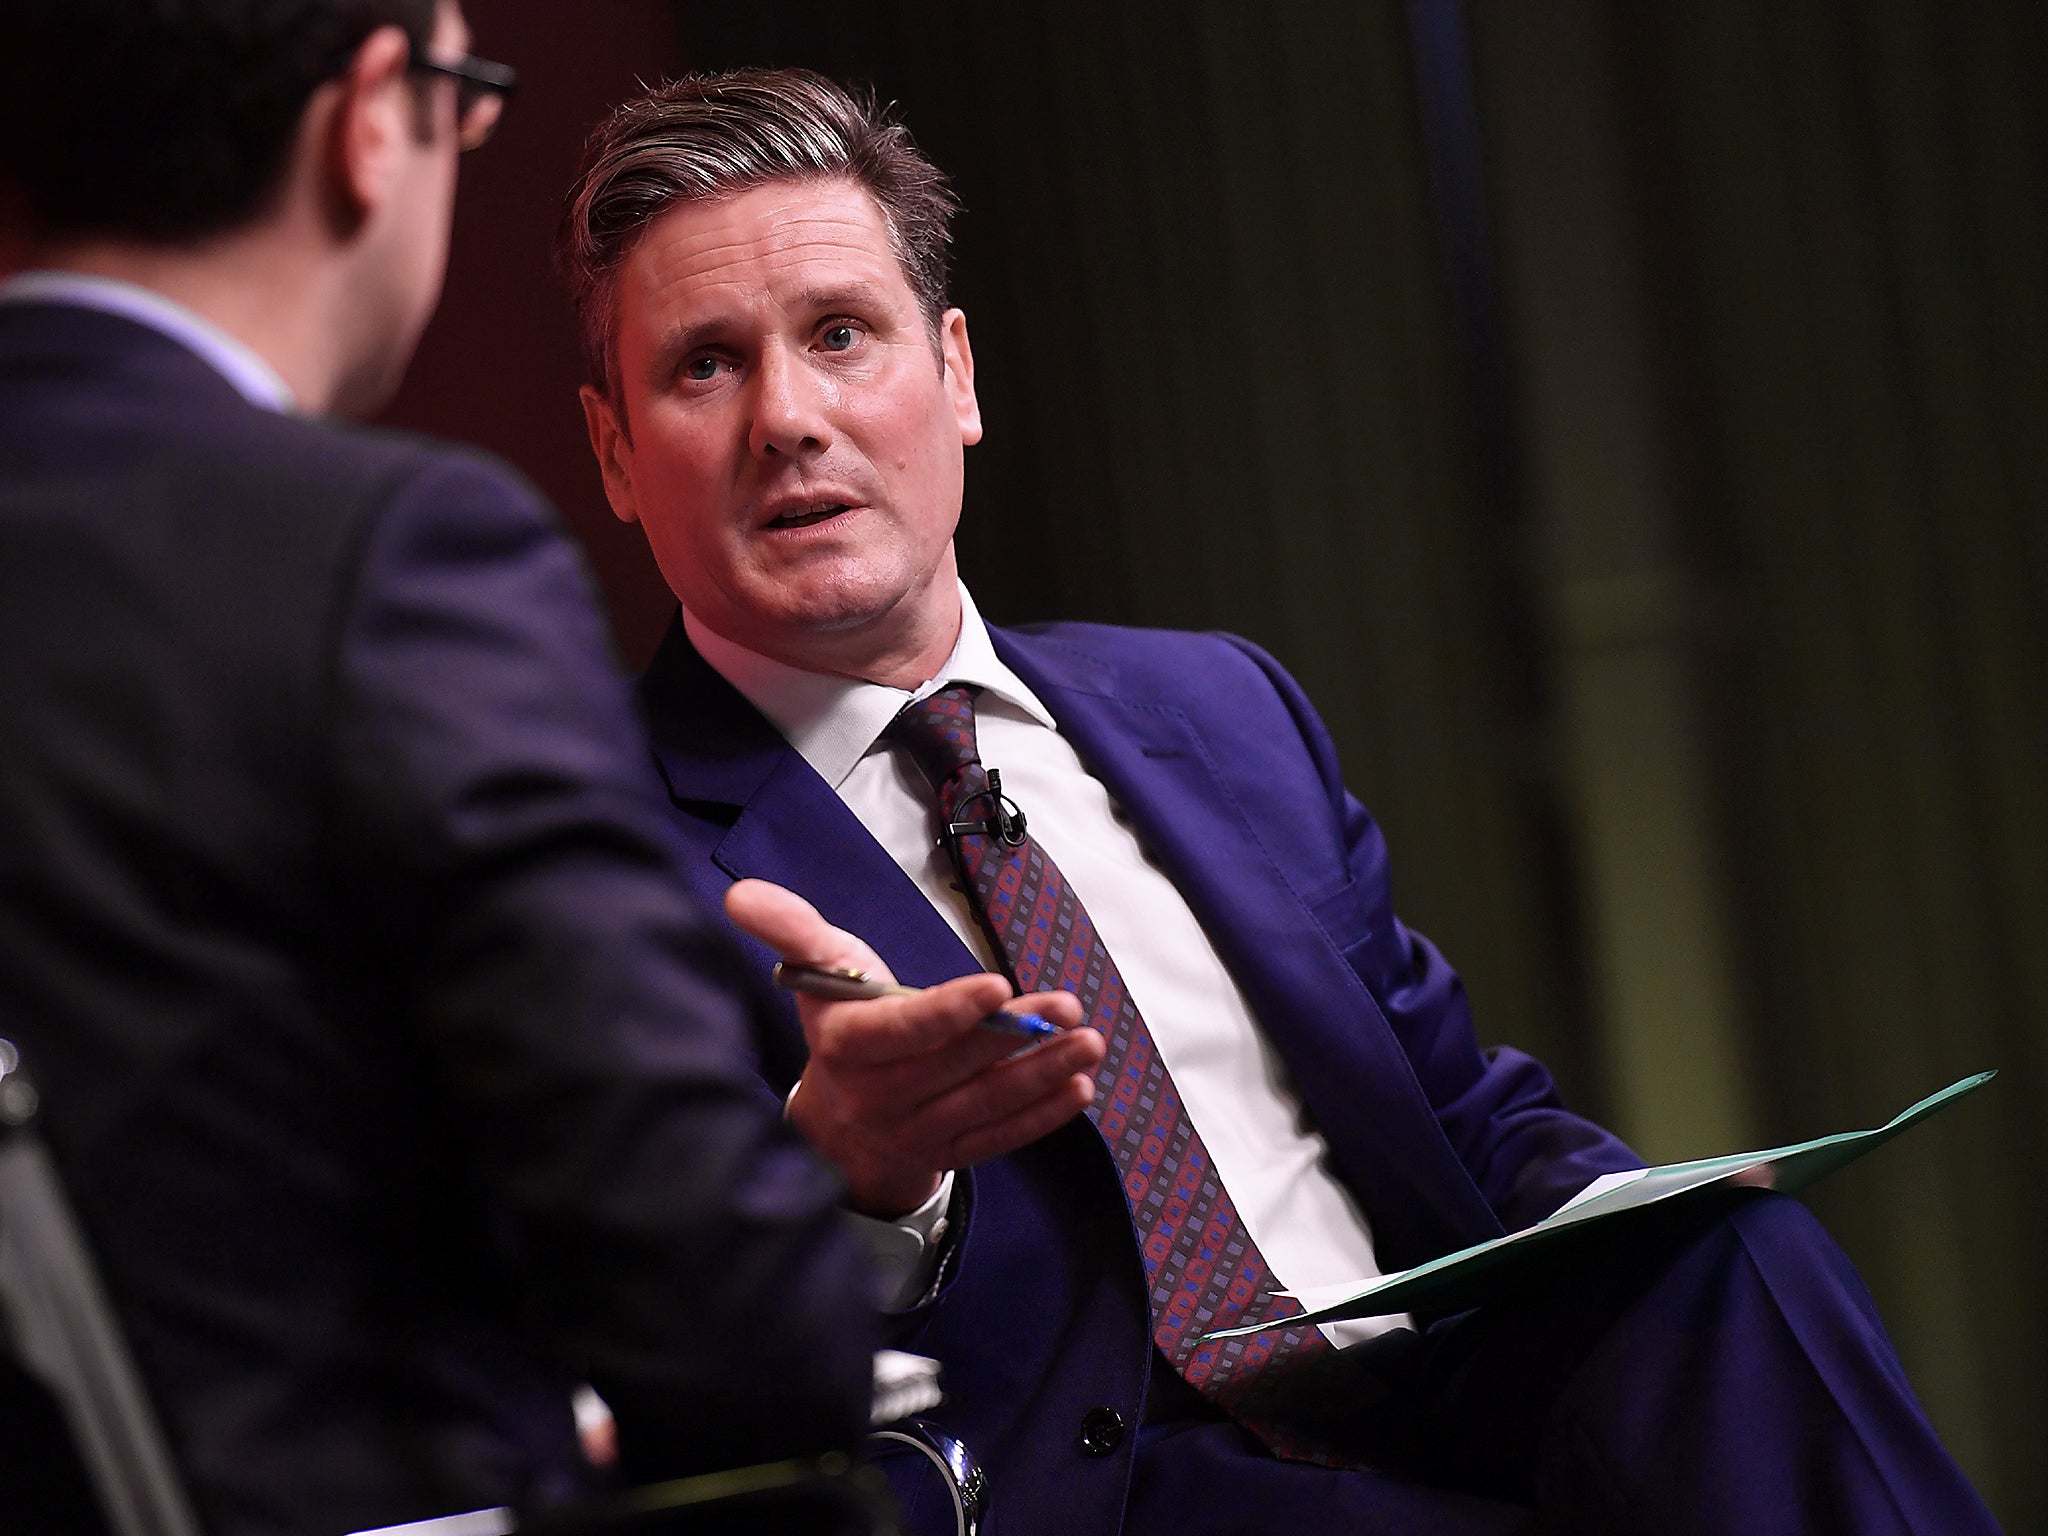 British Labour Party Shadow Secretary of State for Exiting the European Union (Brexit), Keir Starmer